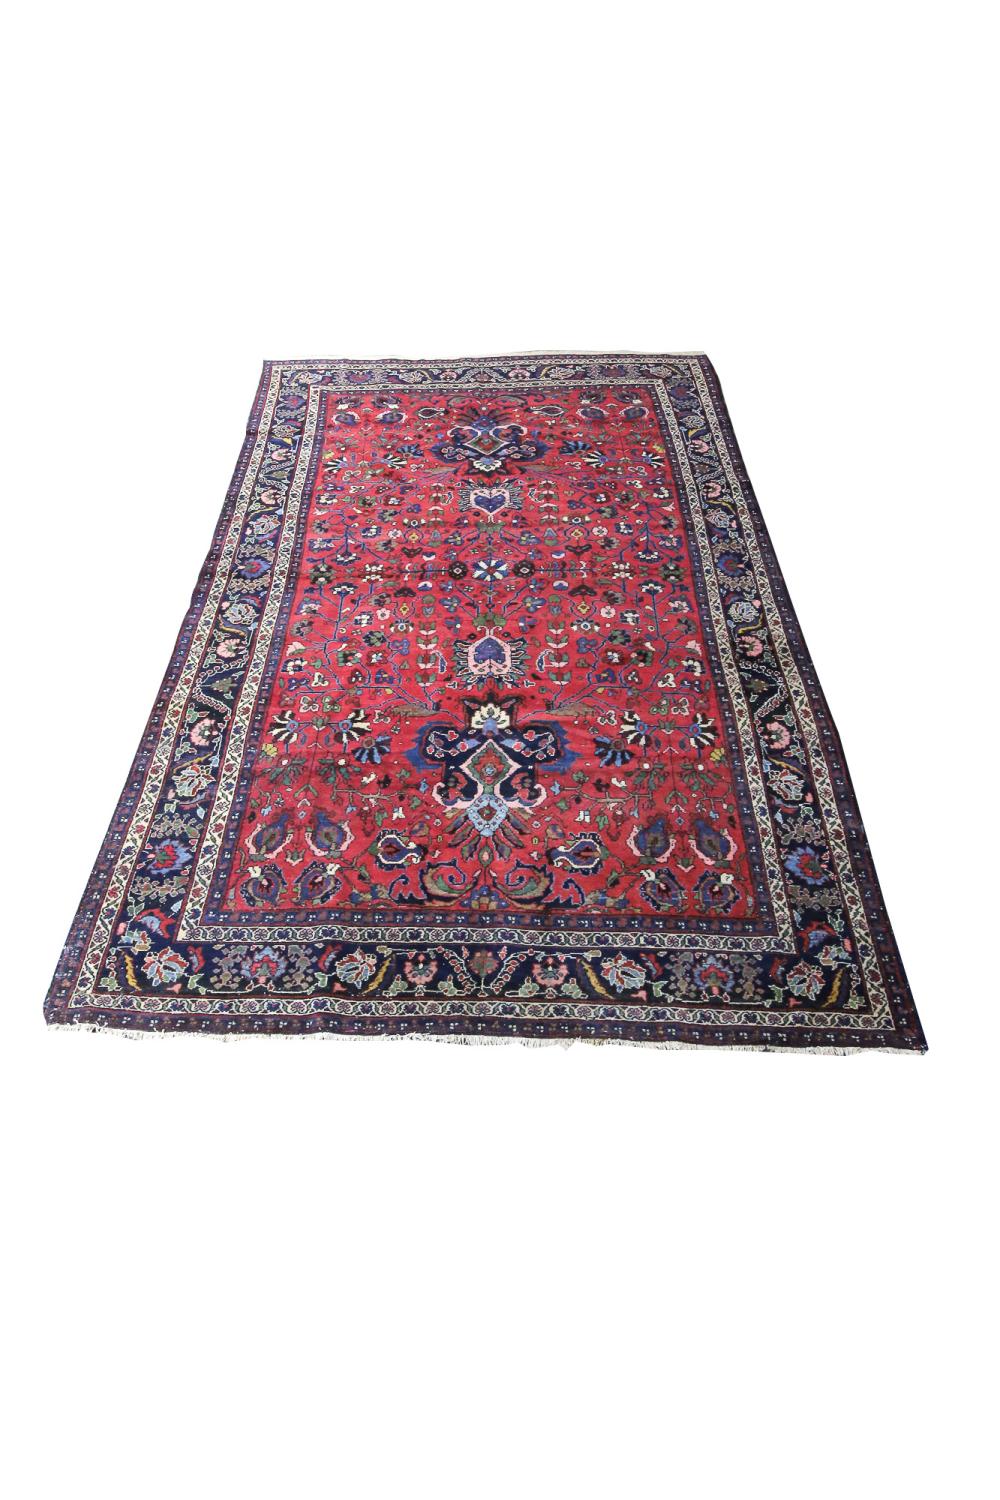 PERSIAN RED BLUE CARPETCondition  33662b